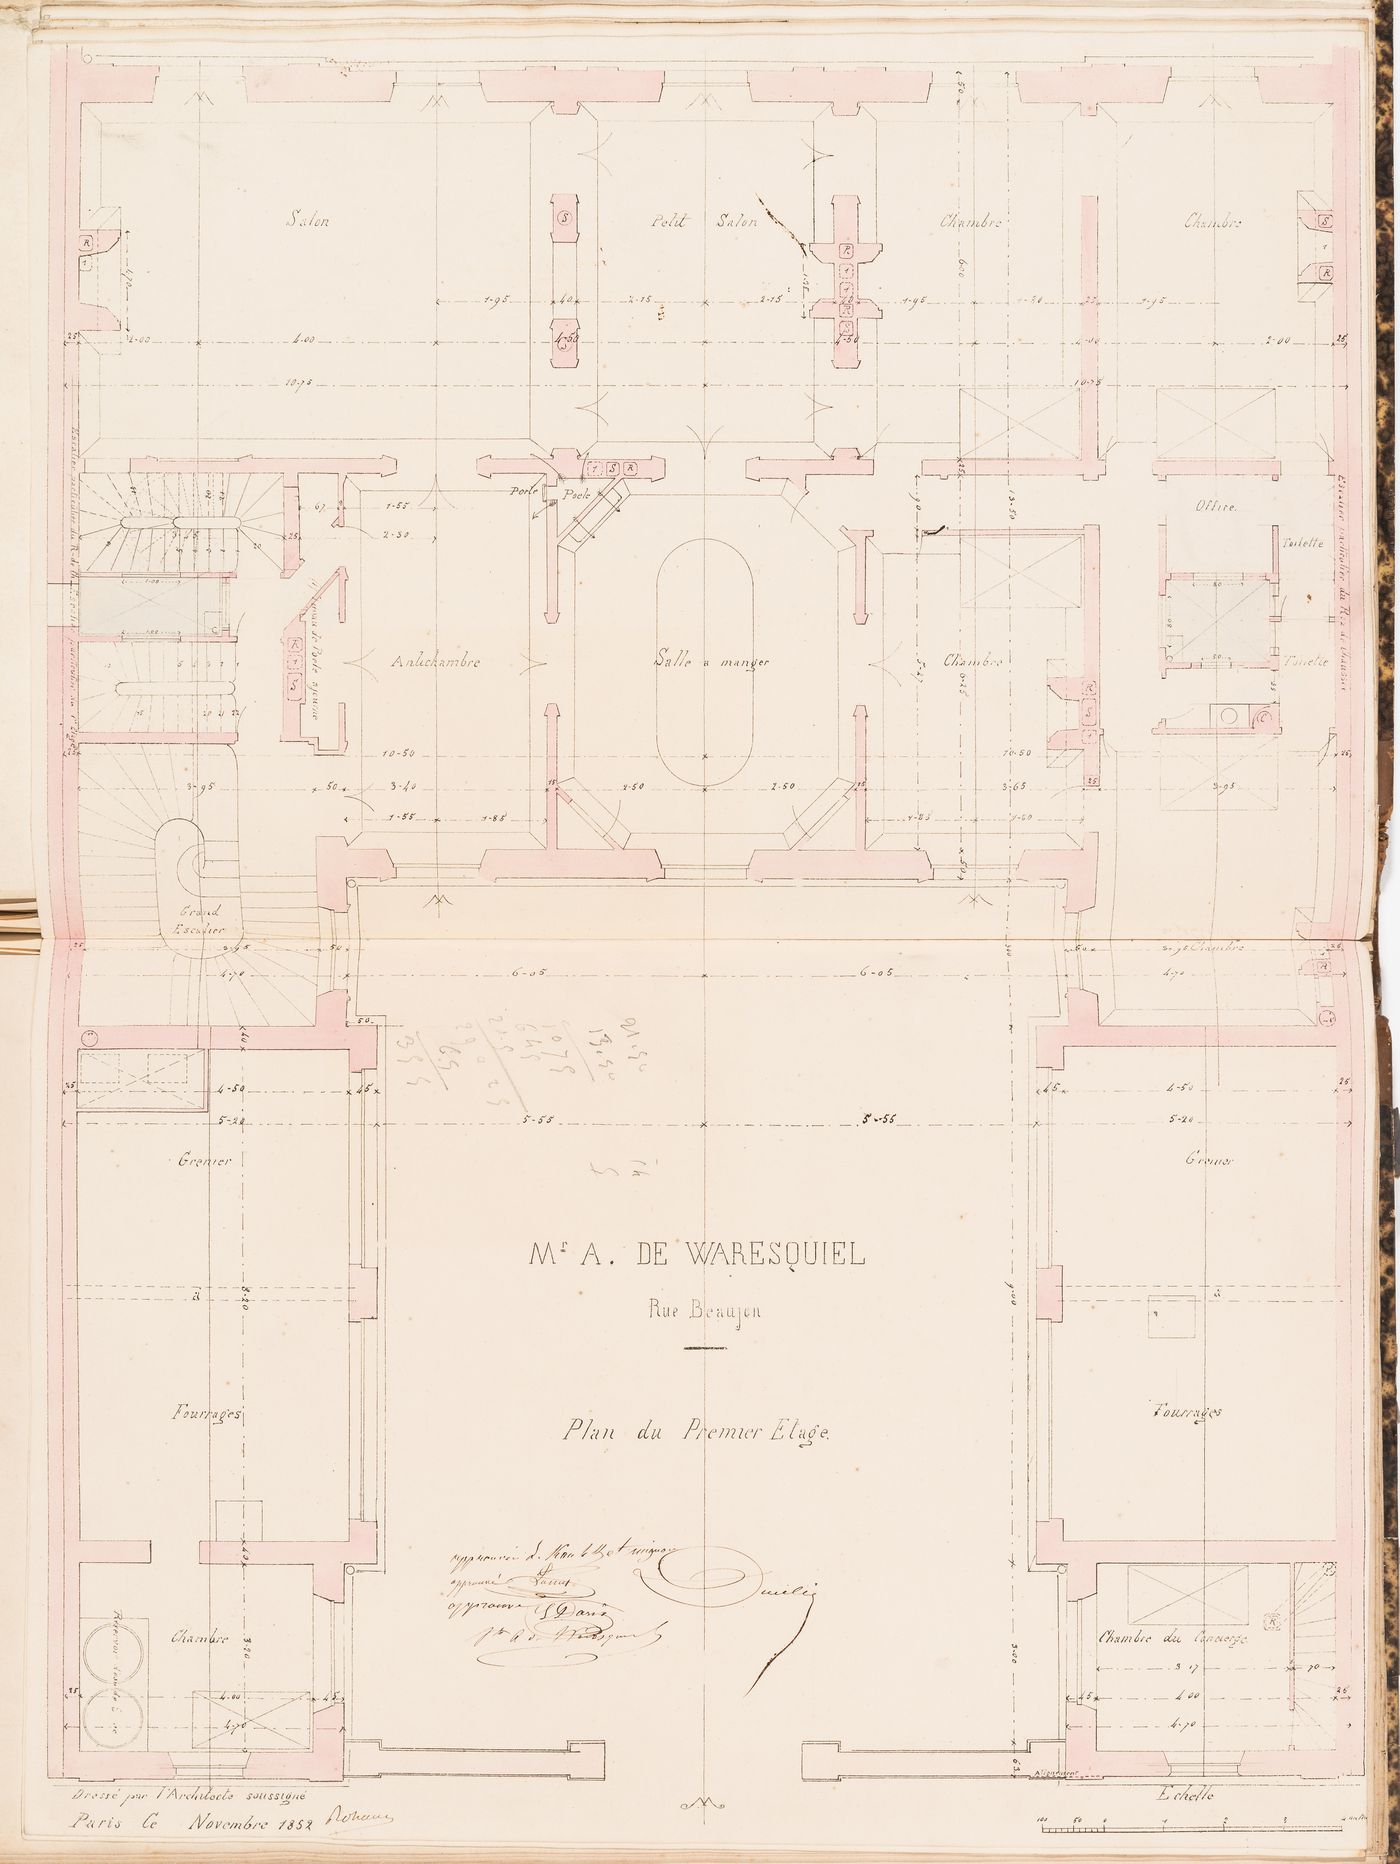 Contract drawing for a house for Monsieur A. Waresquiel, rue Beaujon, Paris: First floor plan